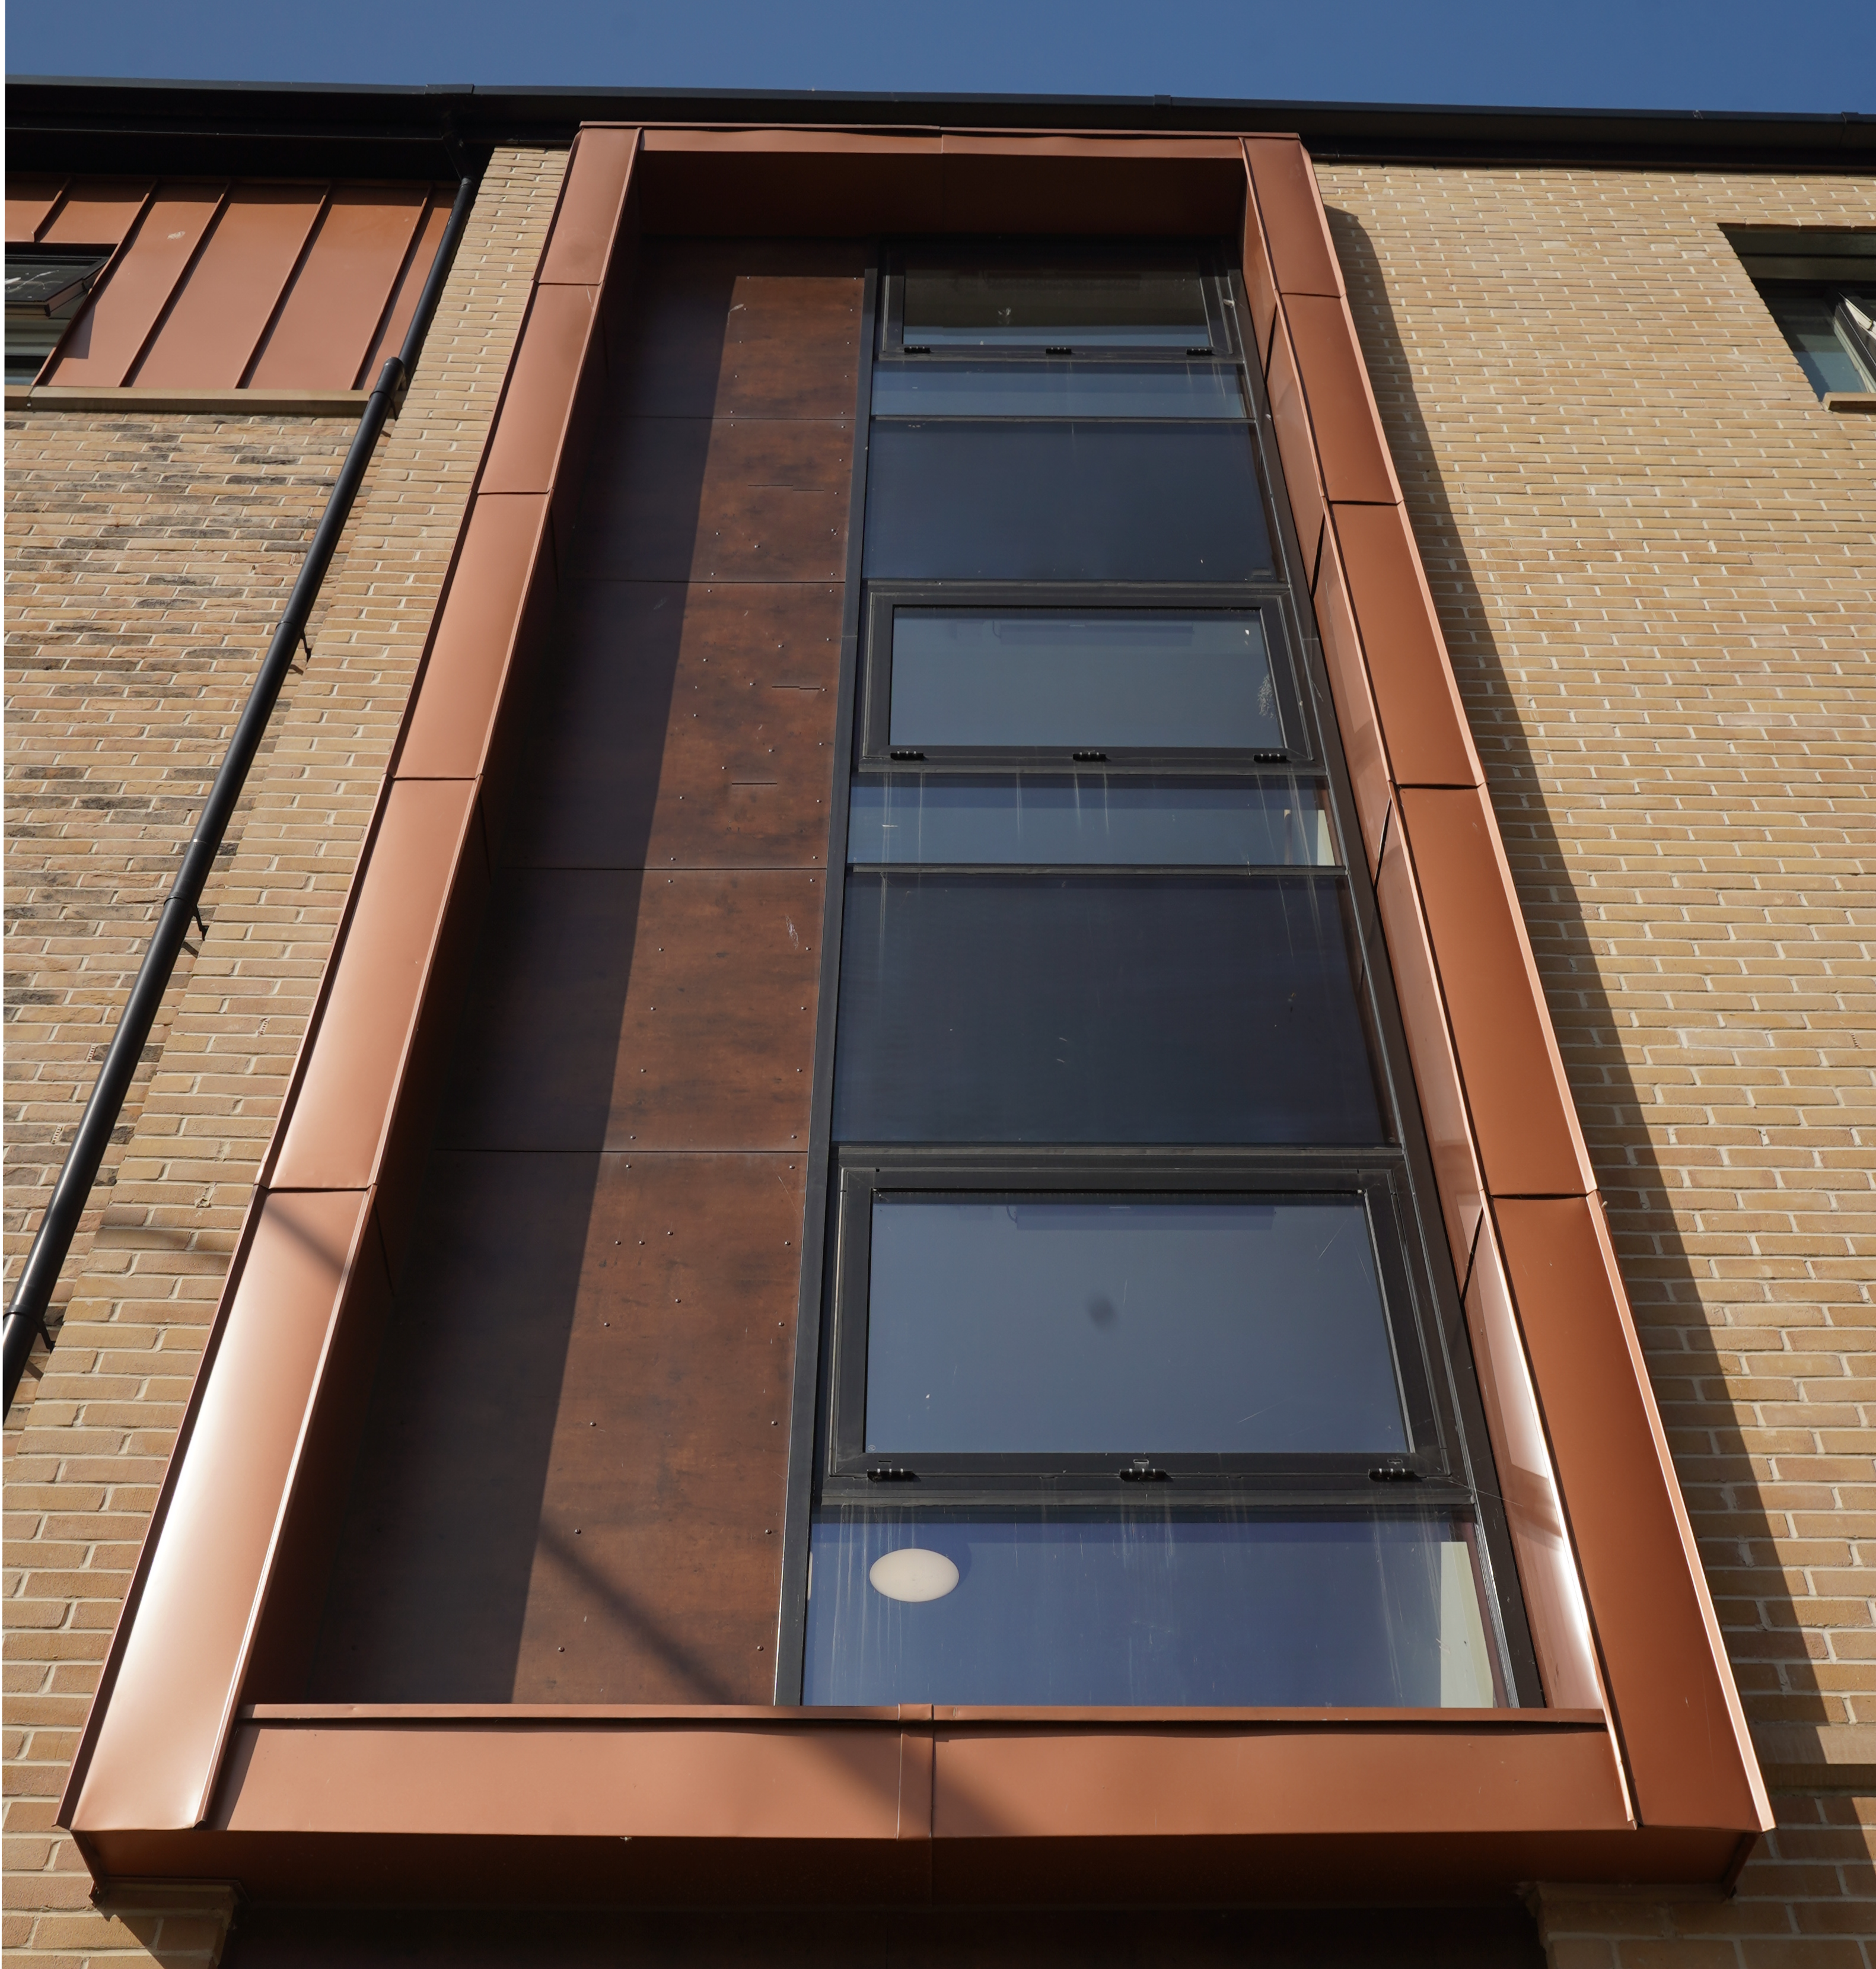 Close-up of a window area on the façade of a residential development on Nethan Street in Glasgow, framed by FALZONAL in New Copper. This high quality PREFA aluminium product complements the clean glass architecture with its warm copper colour, creating a visual link between modern construction and traditional materials. The FALZONAL finish emphasises the precise and sophisticated design of the residential building.